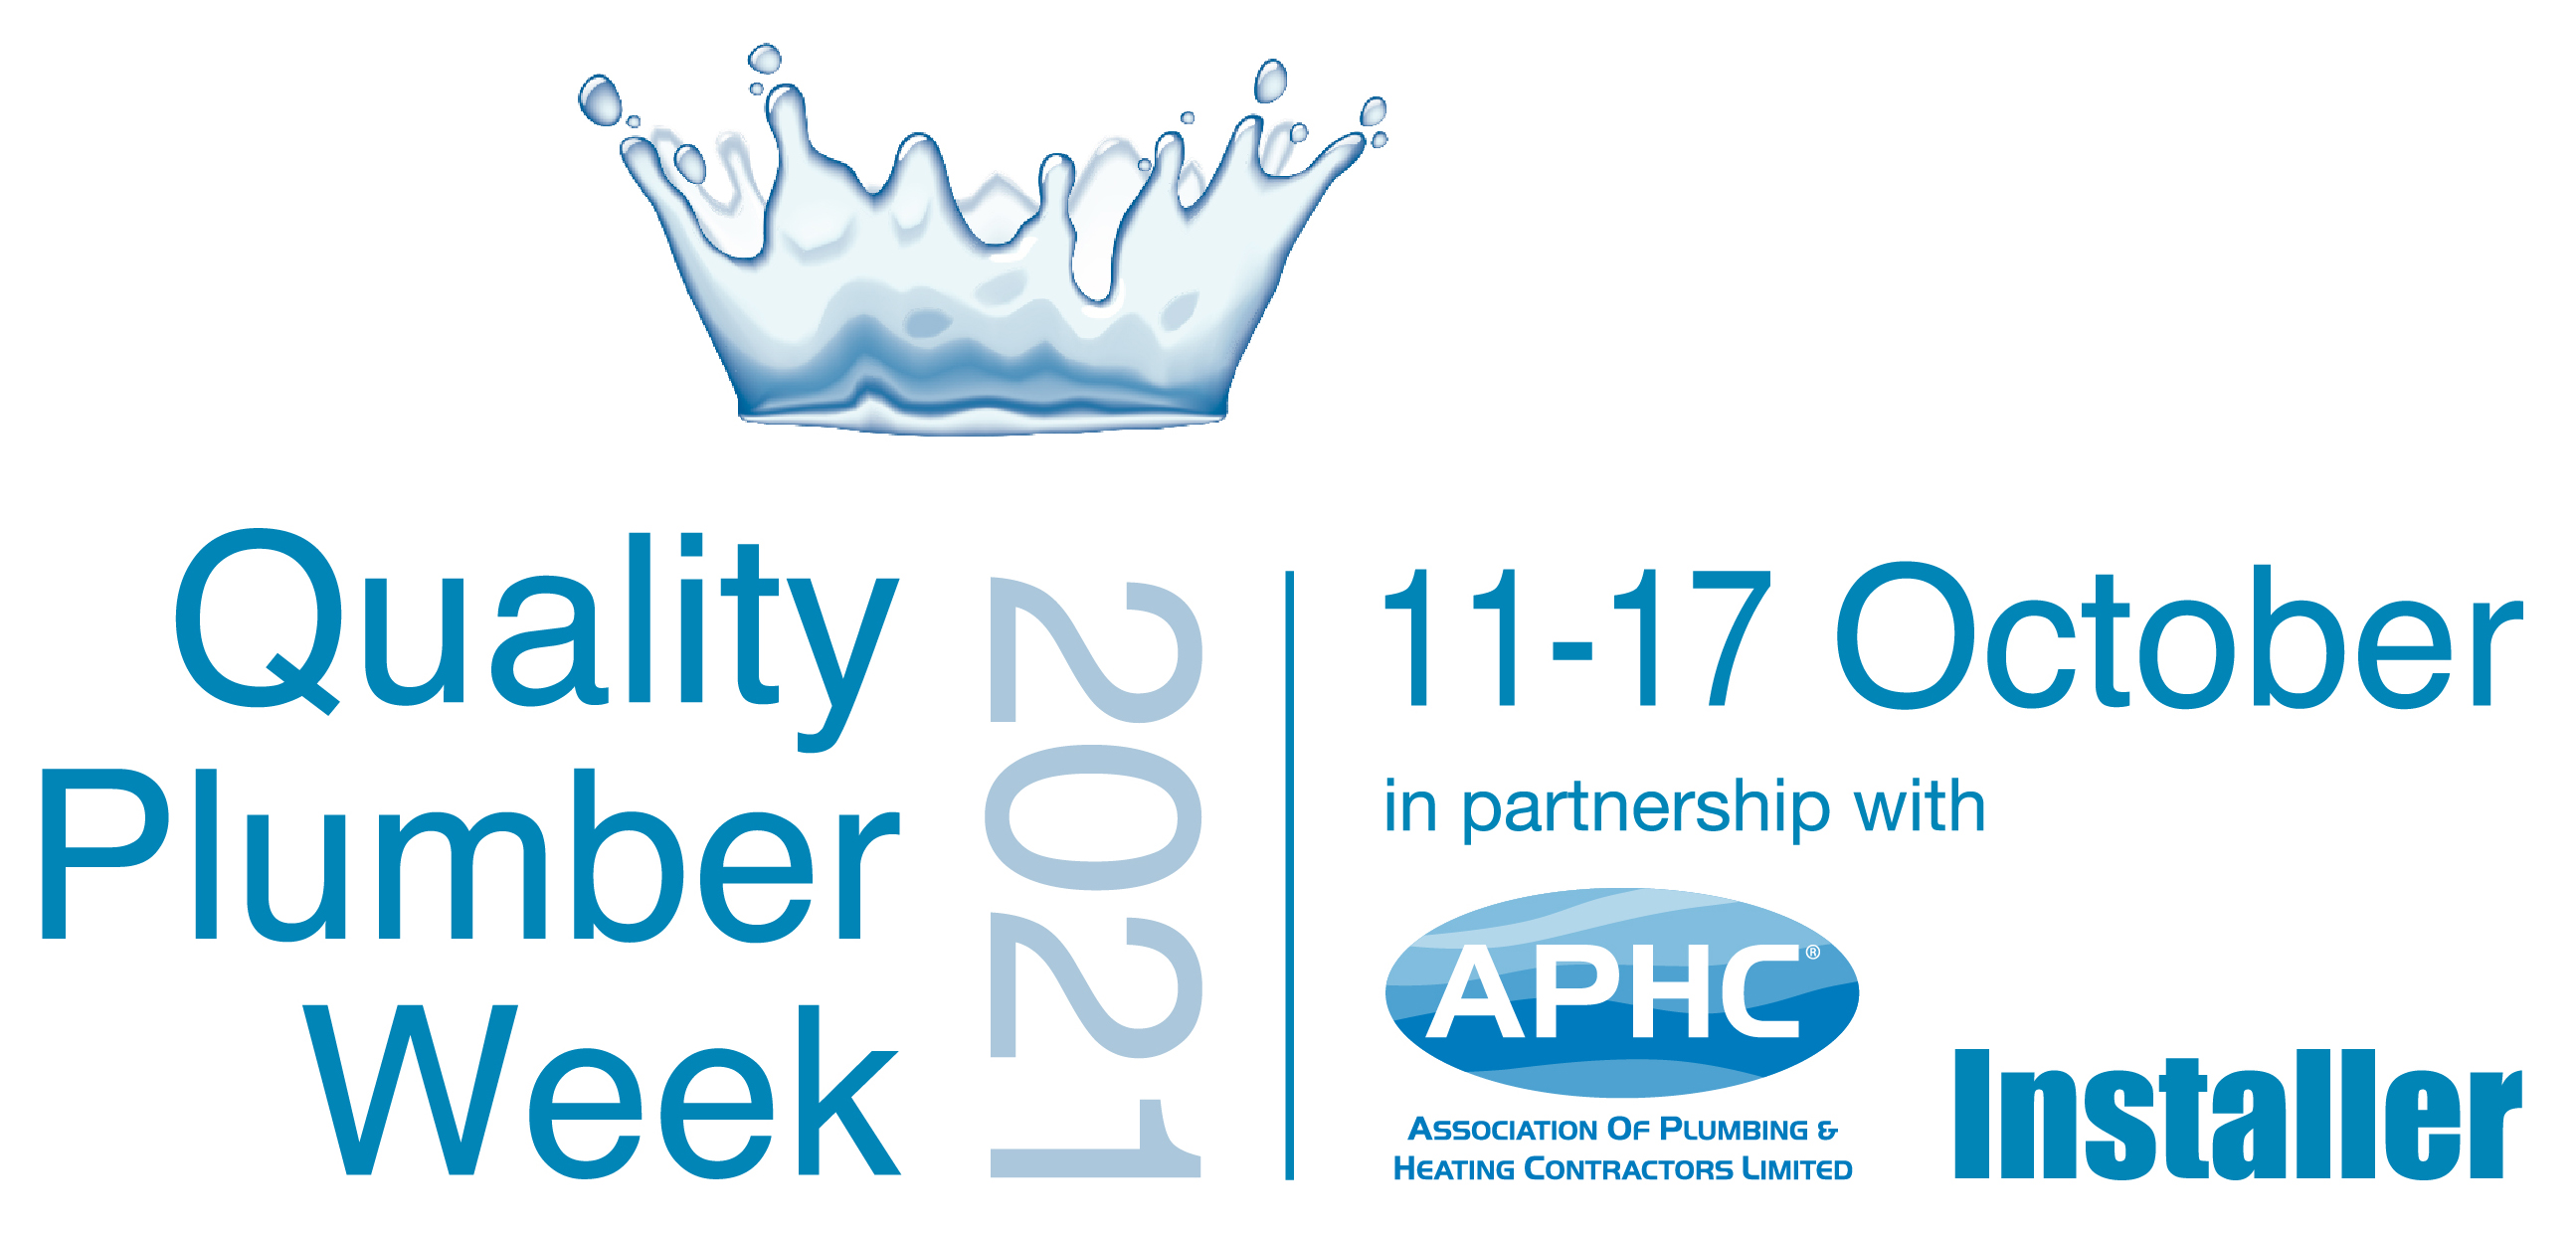 APHC CELEBRATES PLUMBERS KEEPING THE COUNTRY MOVING FOR QUALITY PLUMBER WEEK 2021